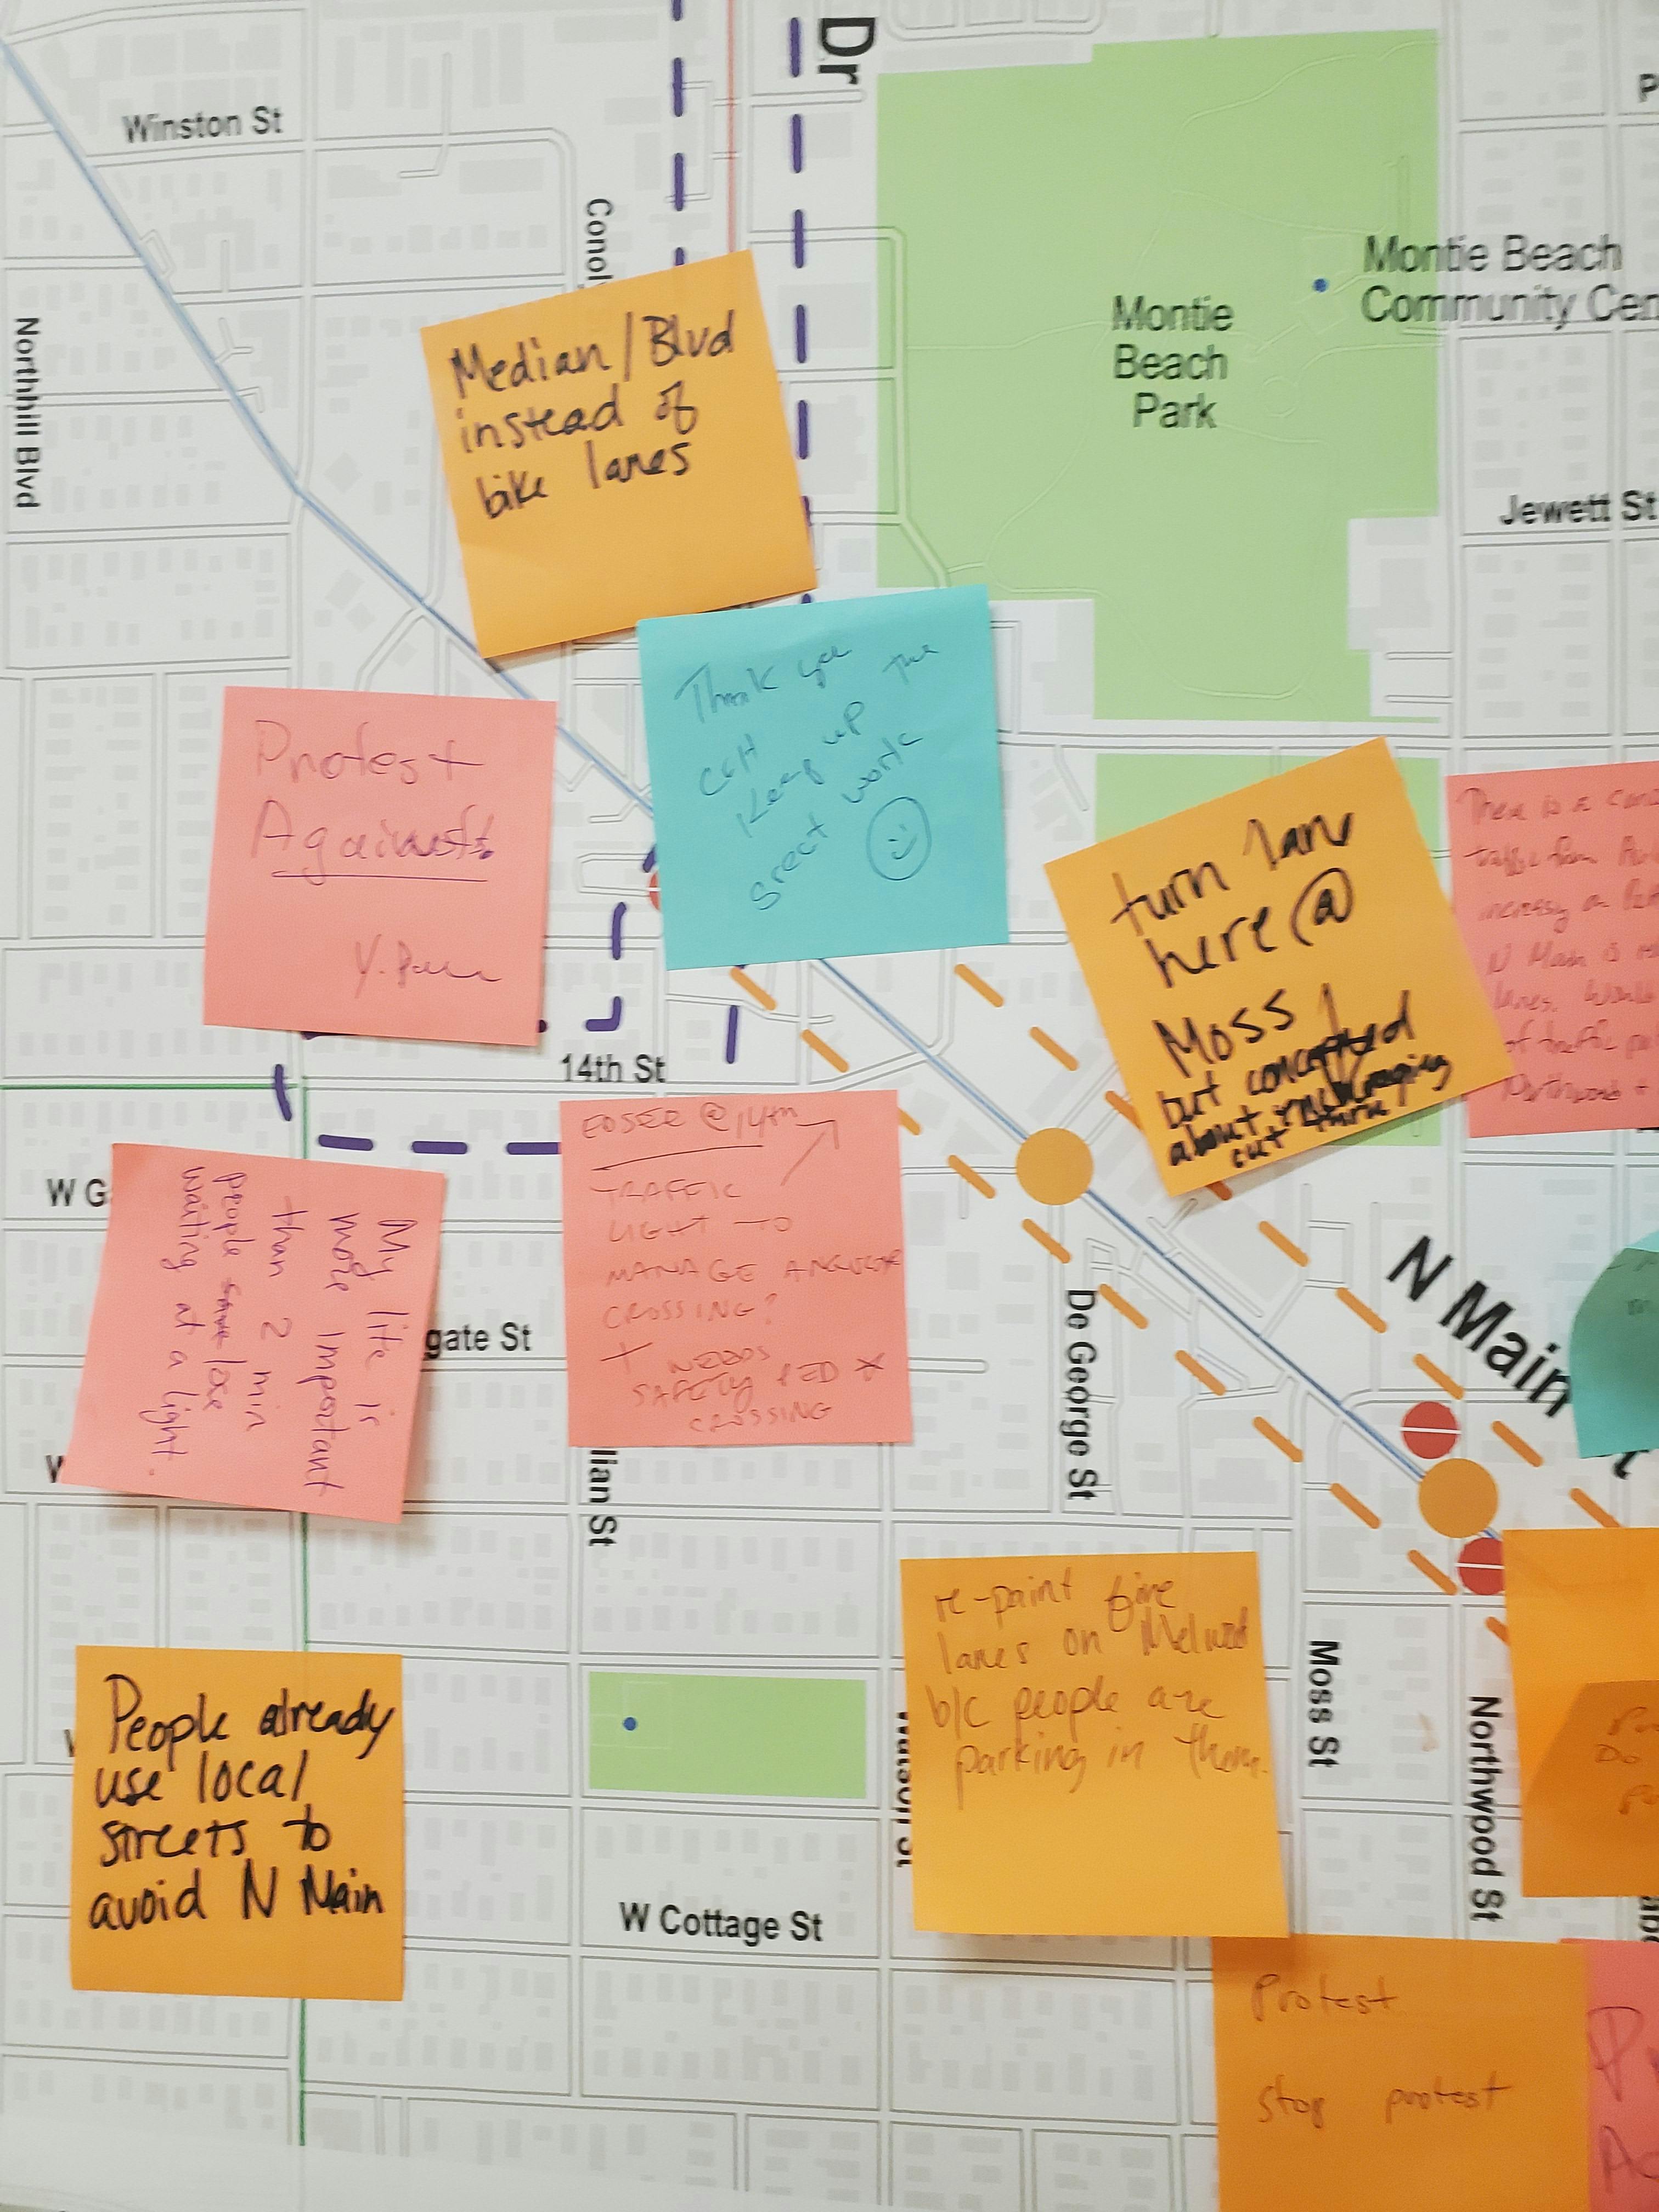 Comments on Proposed Intersection and Crossing Improvements Phase 2 Posterboard